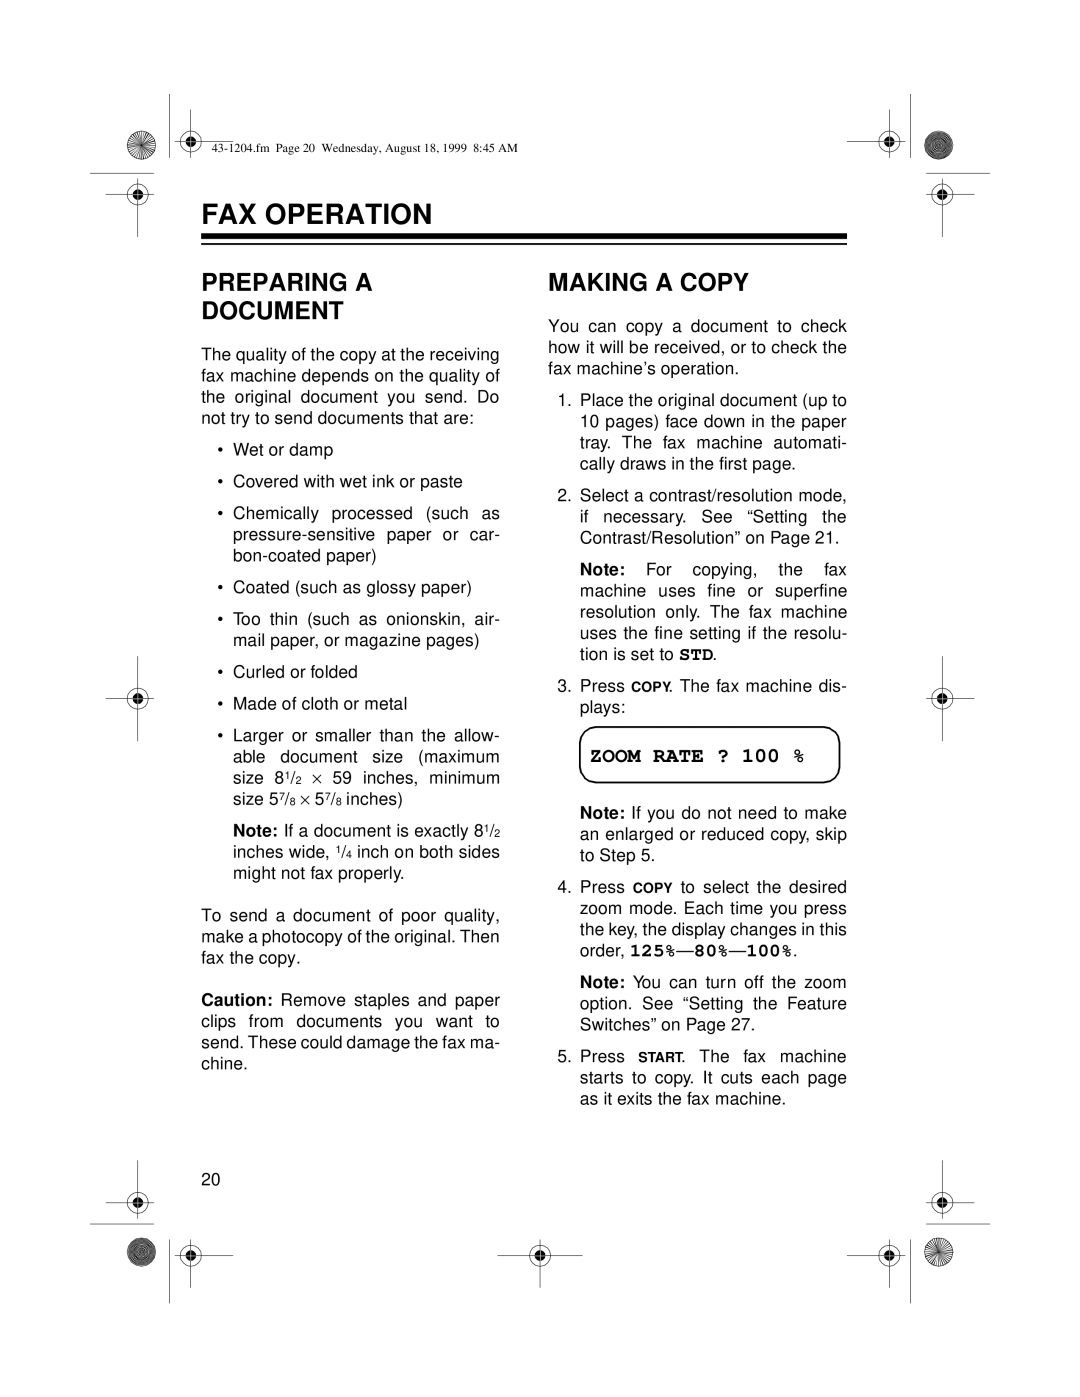 Radio Shack 43-1204 owner manual Fax Operation, Preparing A Document, Making A Copy, ZOOM RATE ? 100 % 